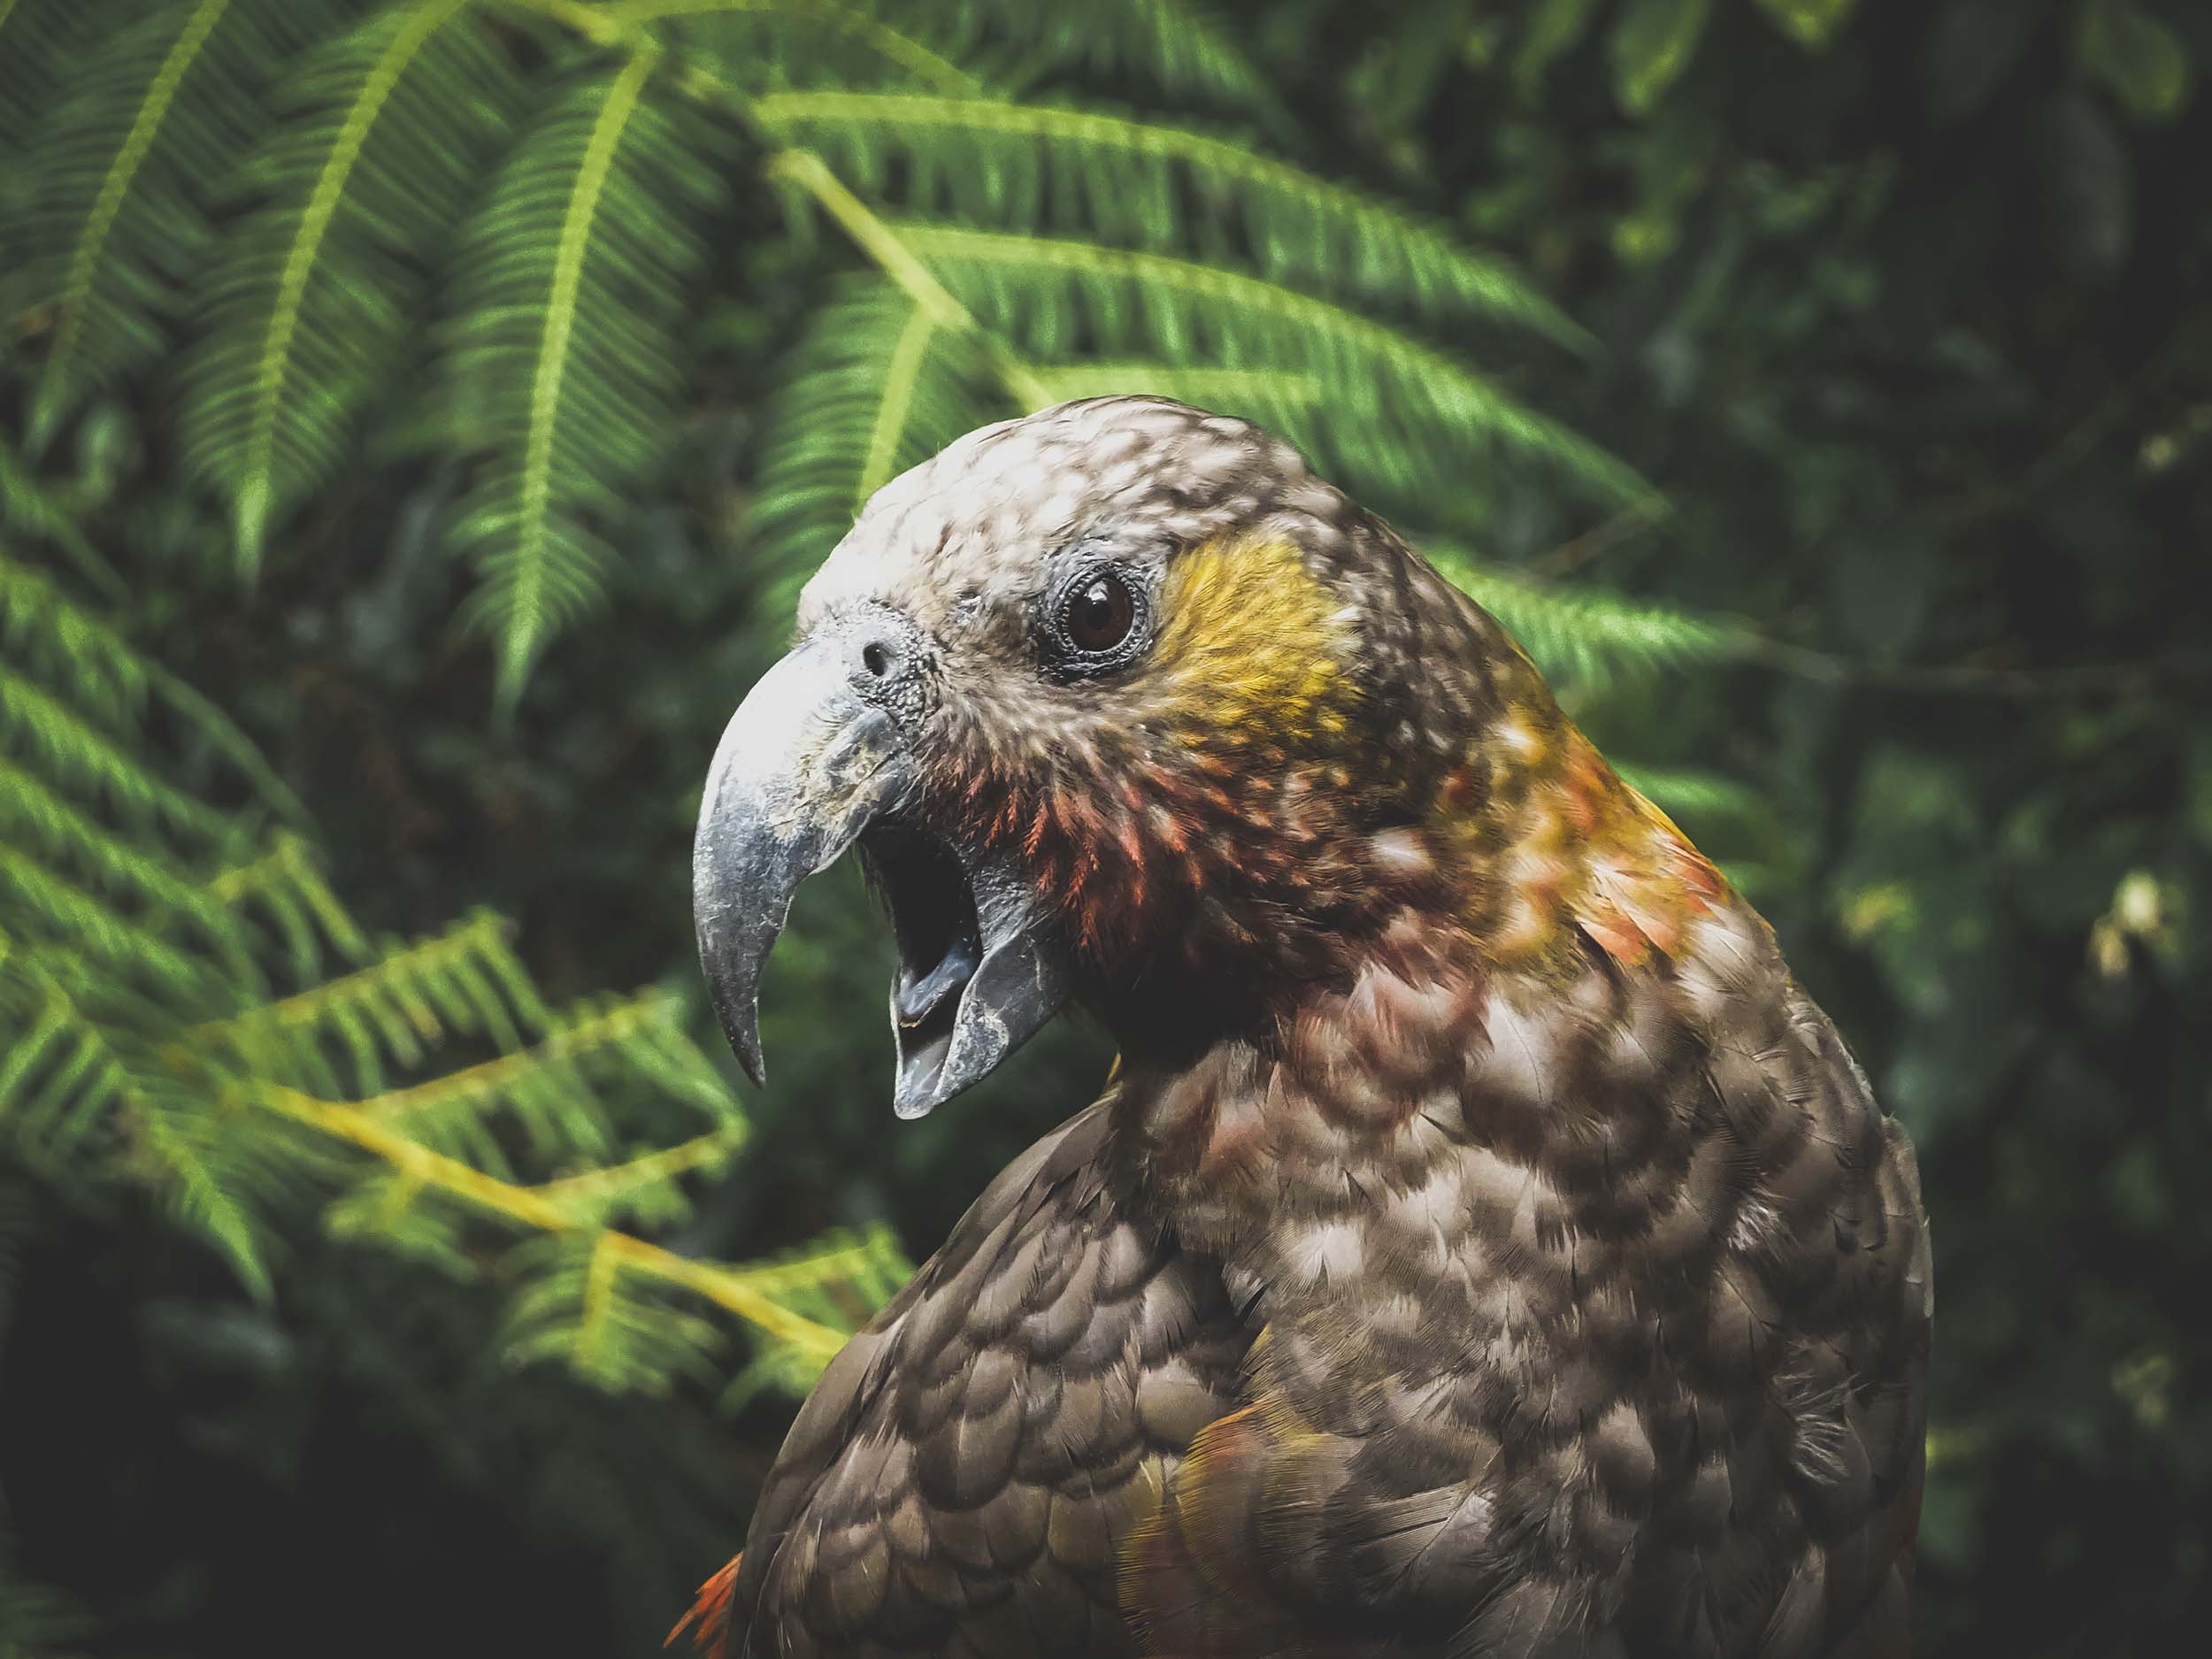 A kea with its beak open, and ferns in the background